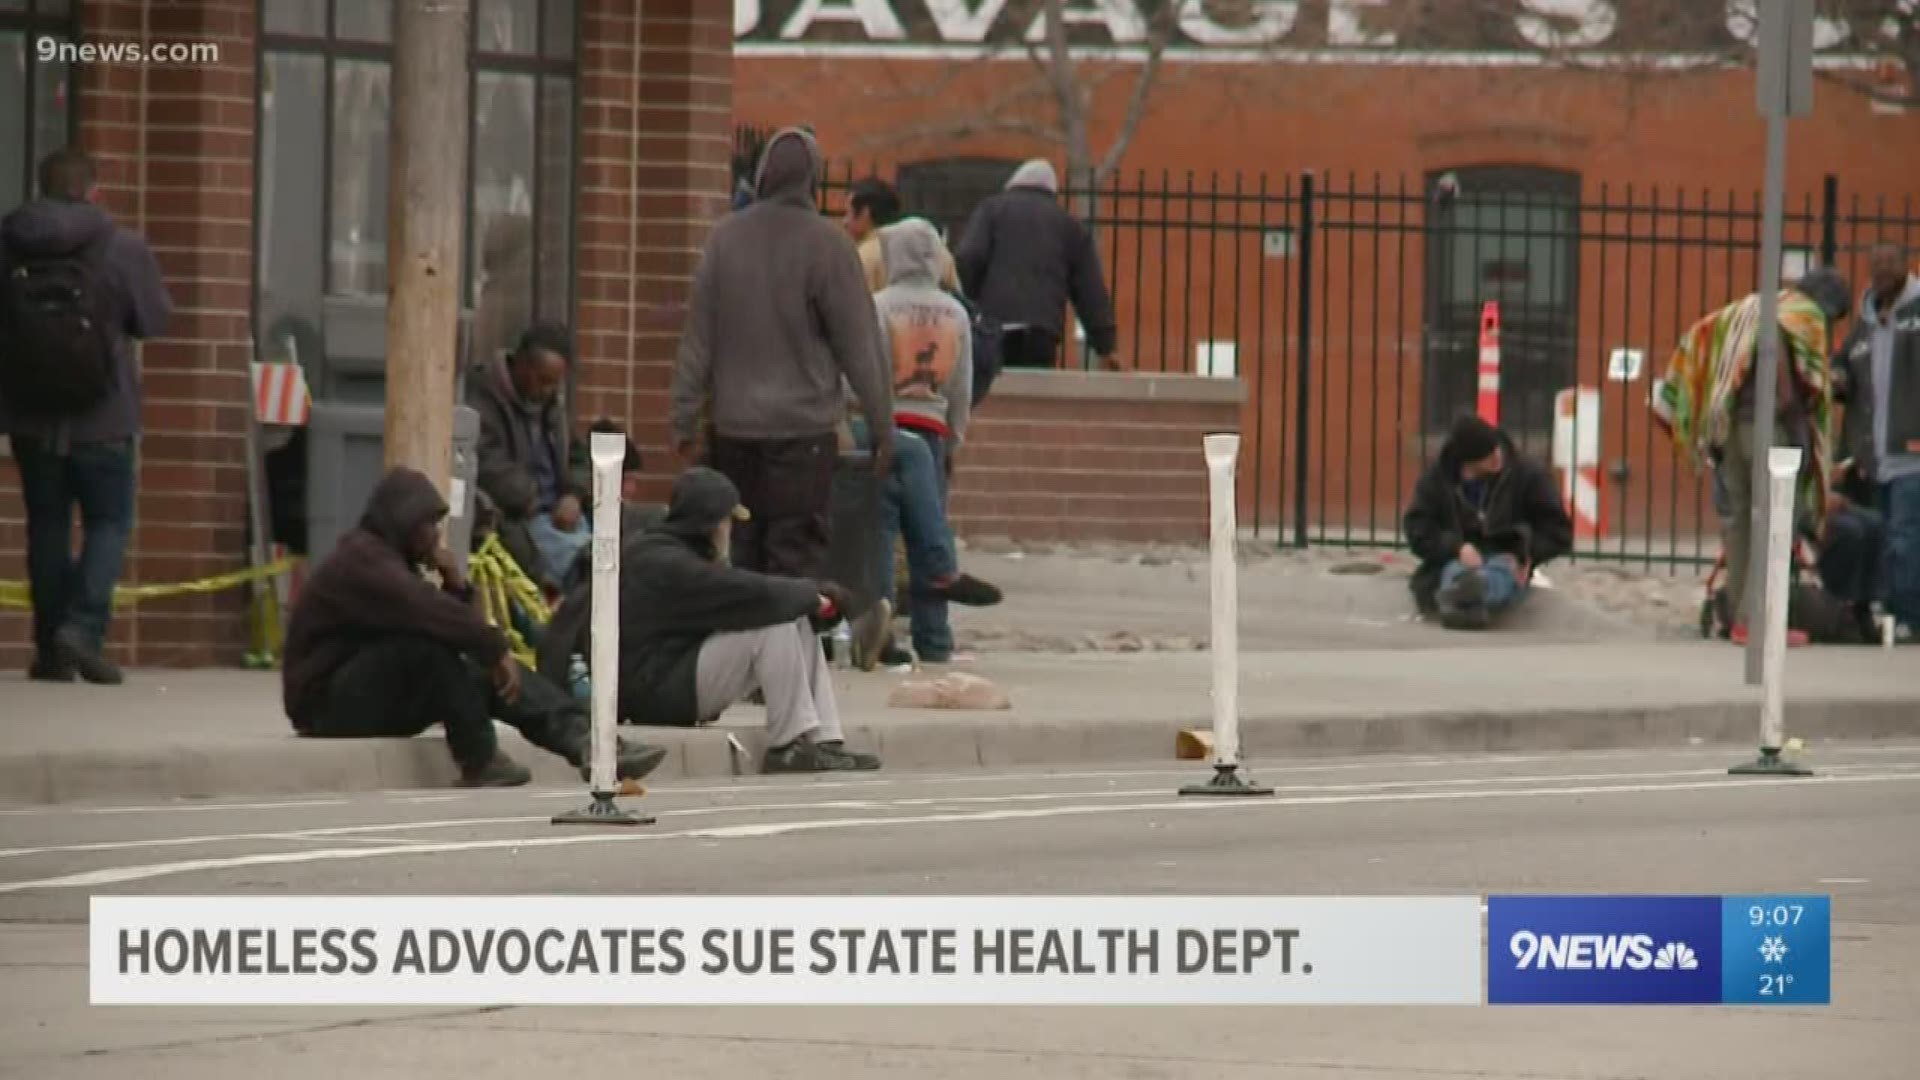 Denver Homeless Out Loud says the state has a duty to protect the health and safety of all Coloradans.